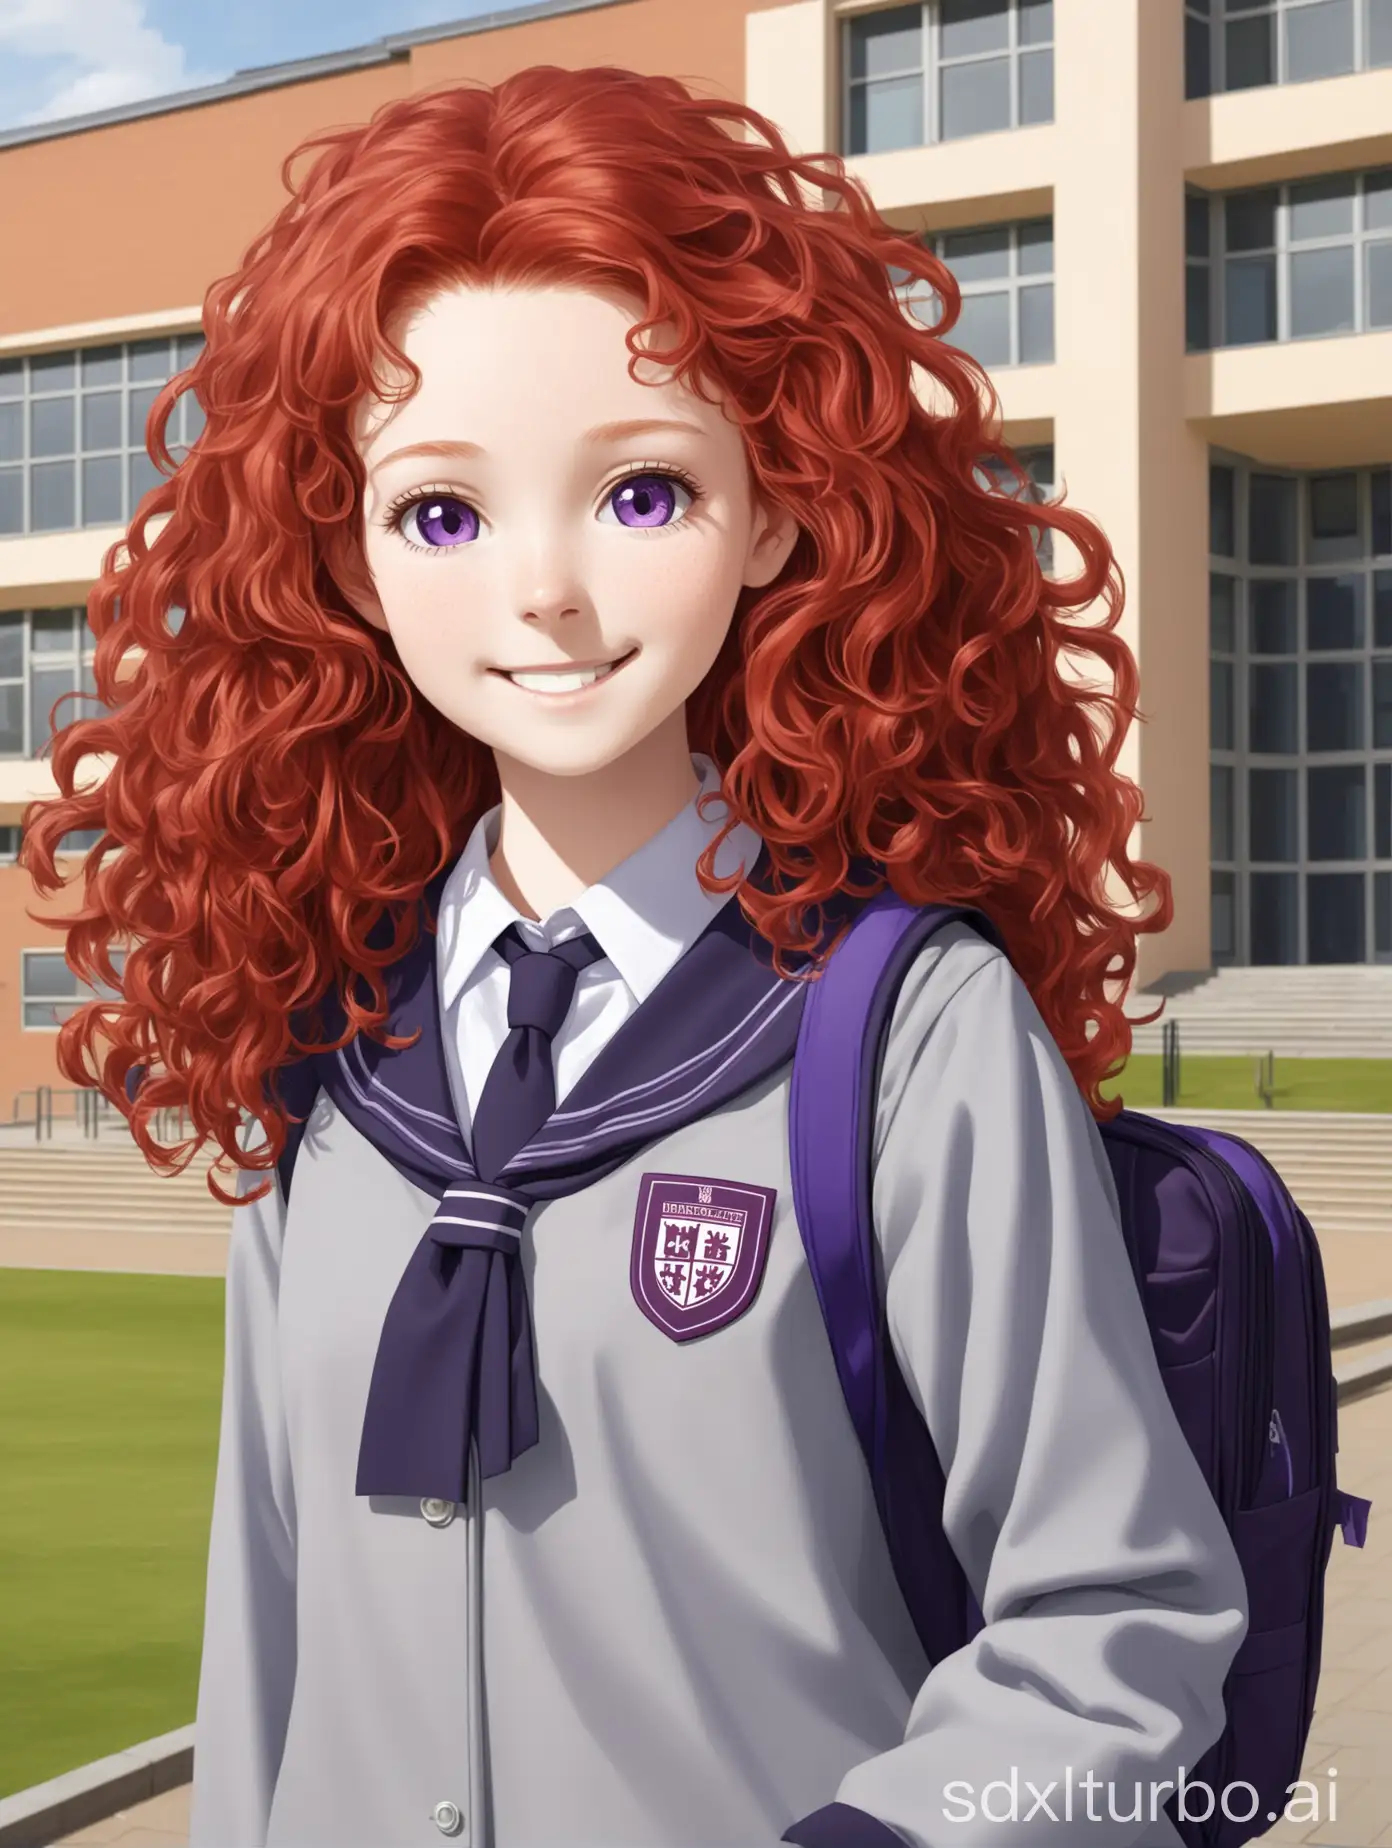 A redhead student girl, with frizzy hair, smiling, grey and violet university uniforme, in a facade of a building